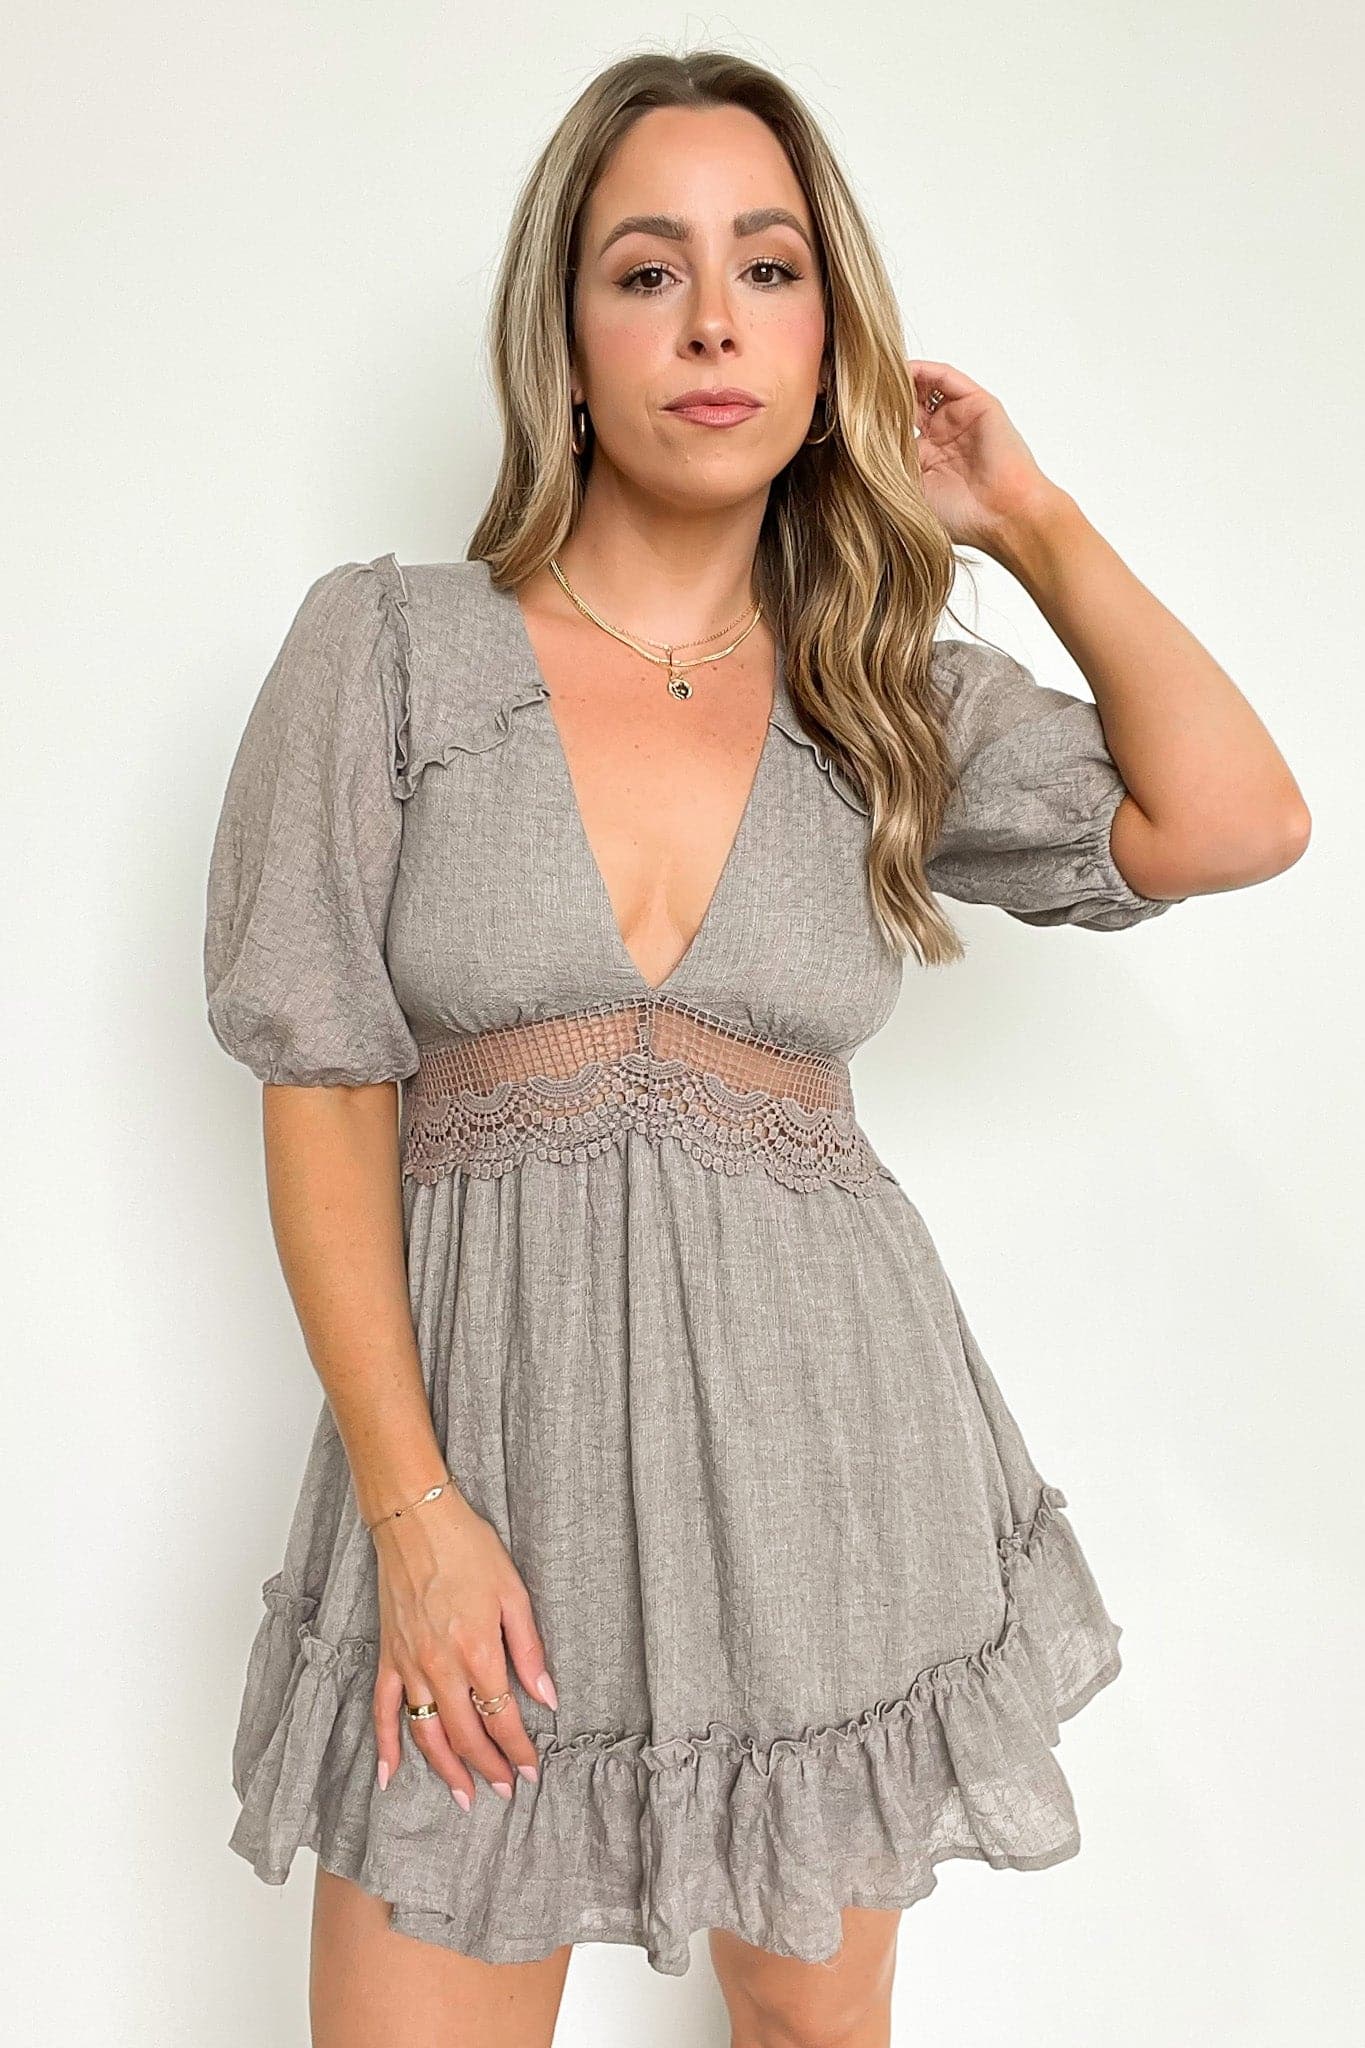  Every Last Detail V-Neck Lace Dress - FINAL SALE - Madison and Mallory